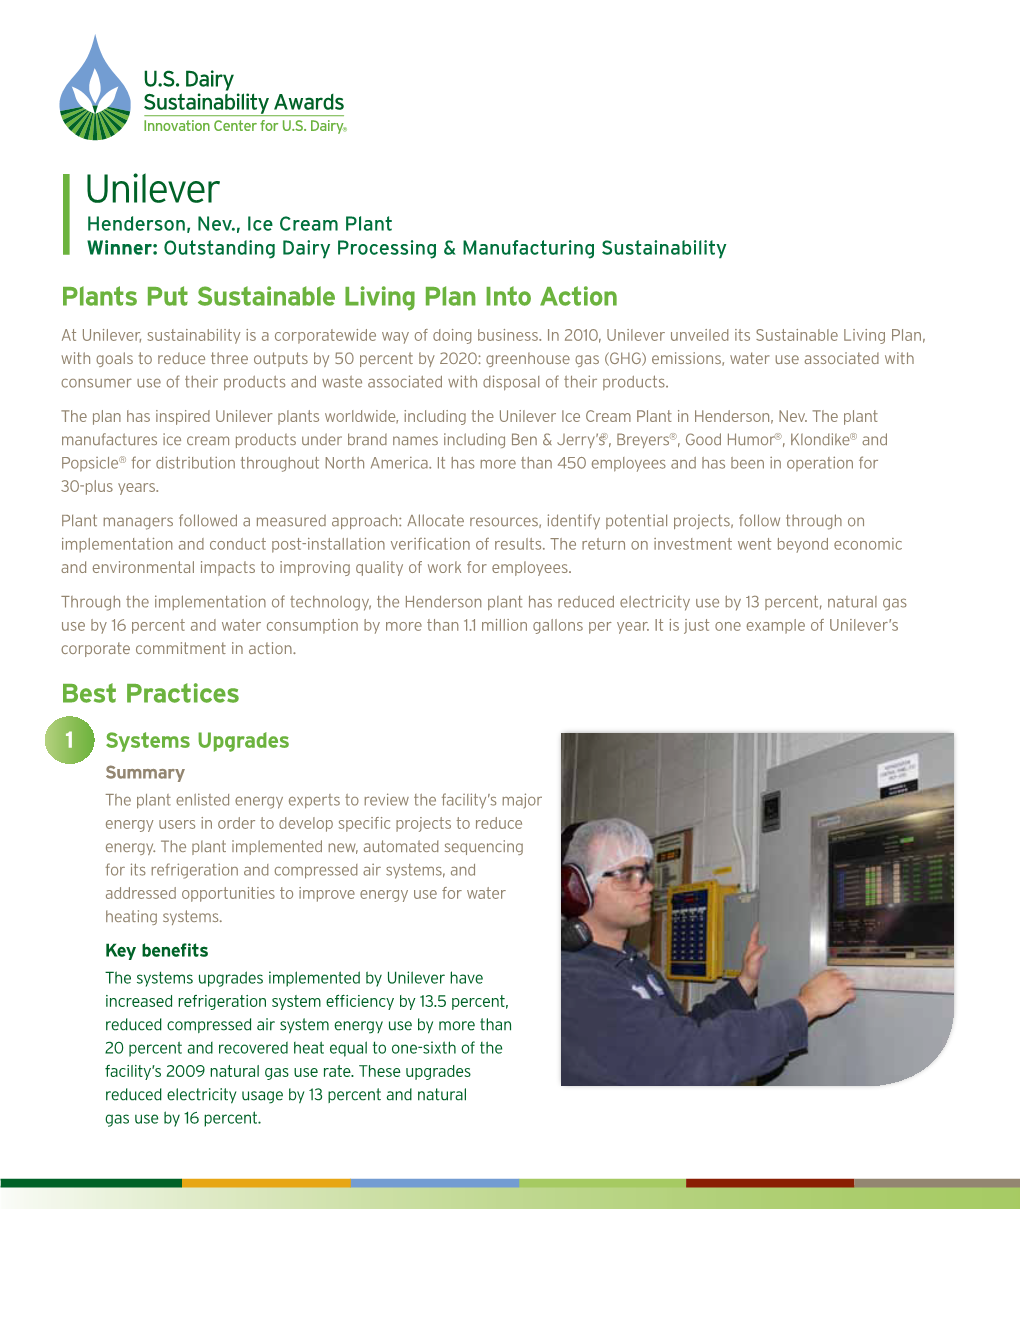 Unilever Henderson, Nev., Ice Cream Plant Winner: Outstanding Dairy Processing & Manufacturing Sustainability Plants Put Sustainable Living Plan Into Action